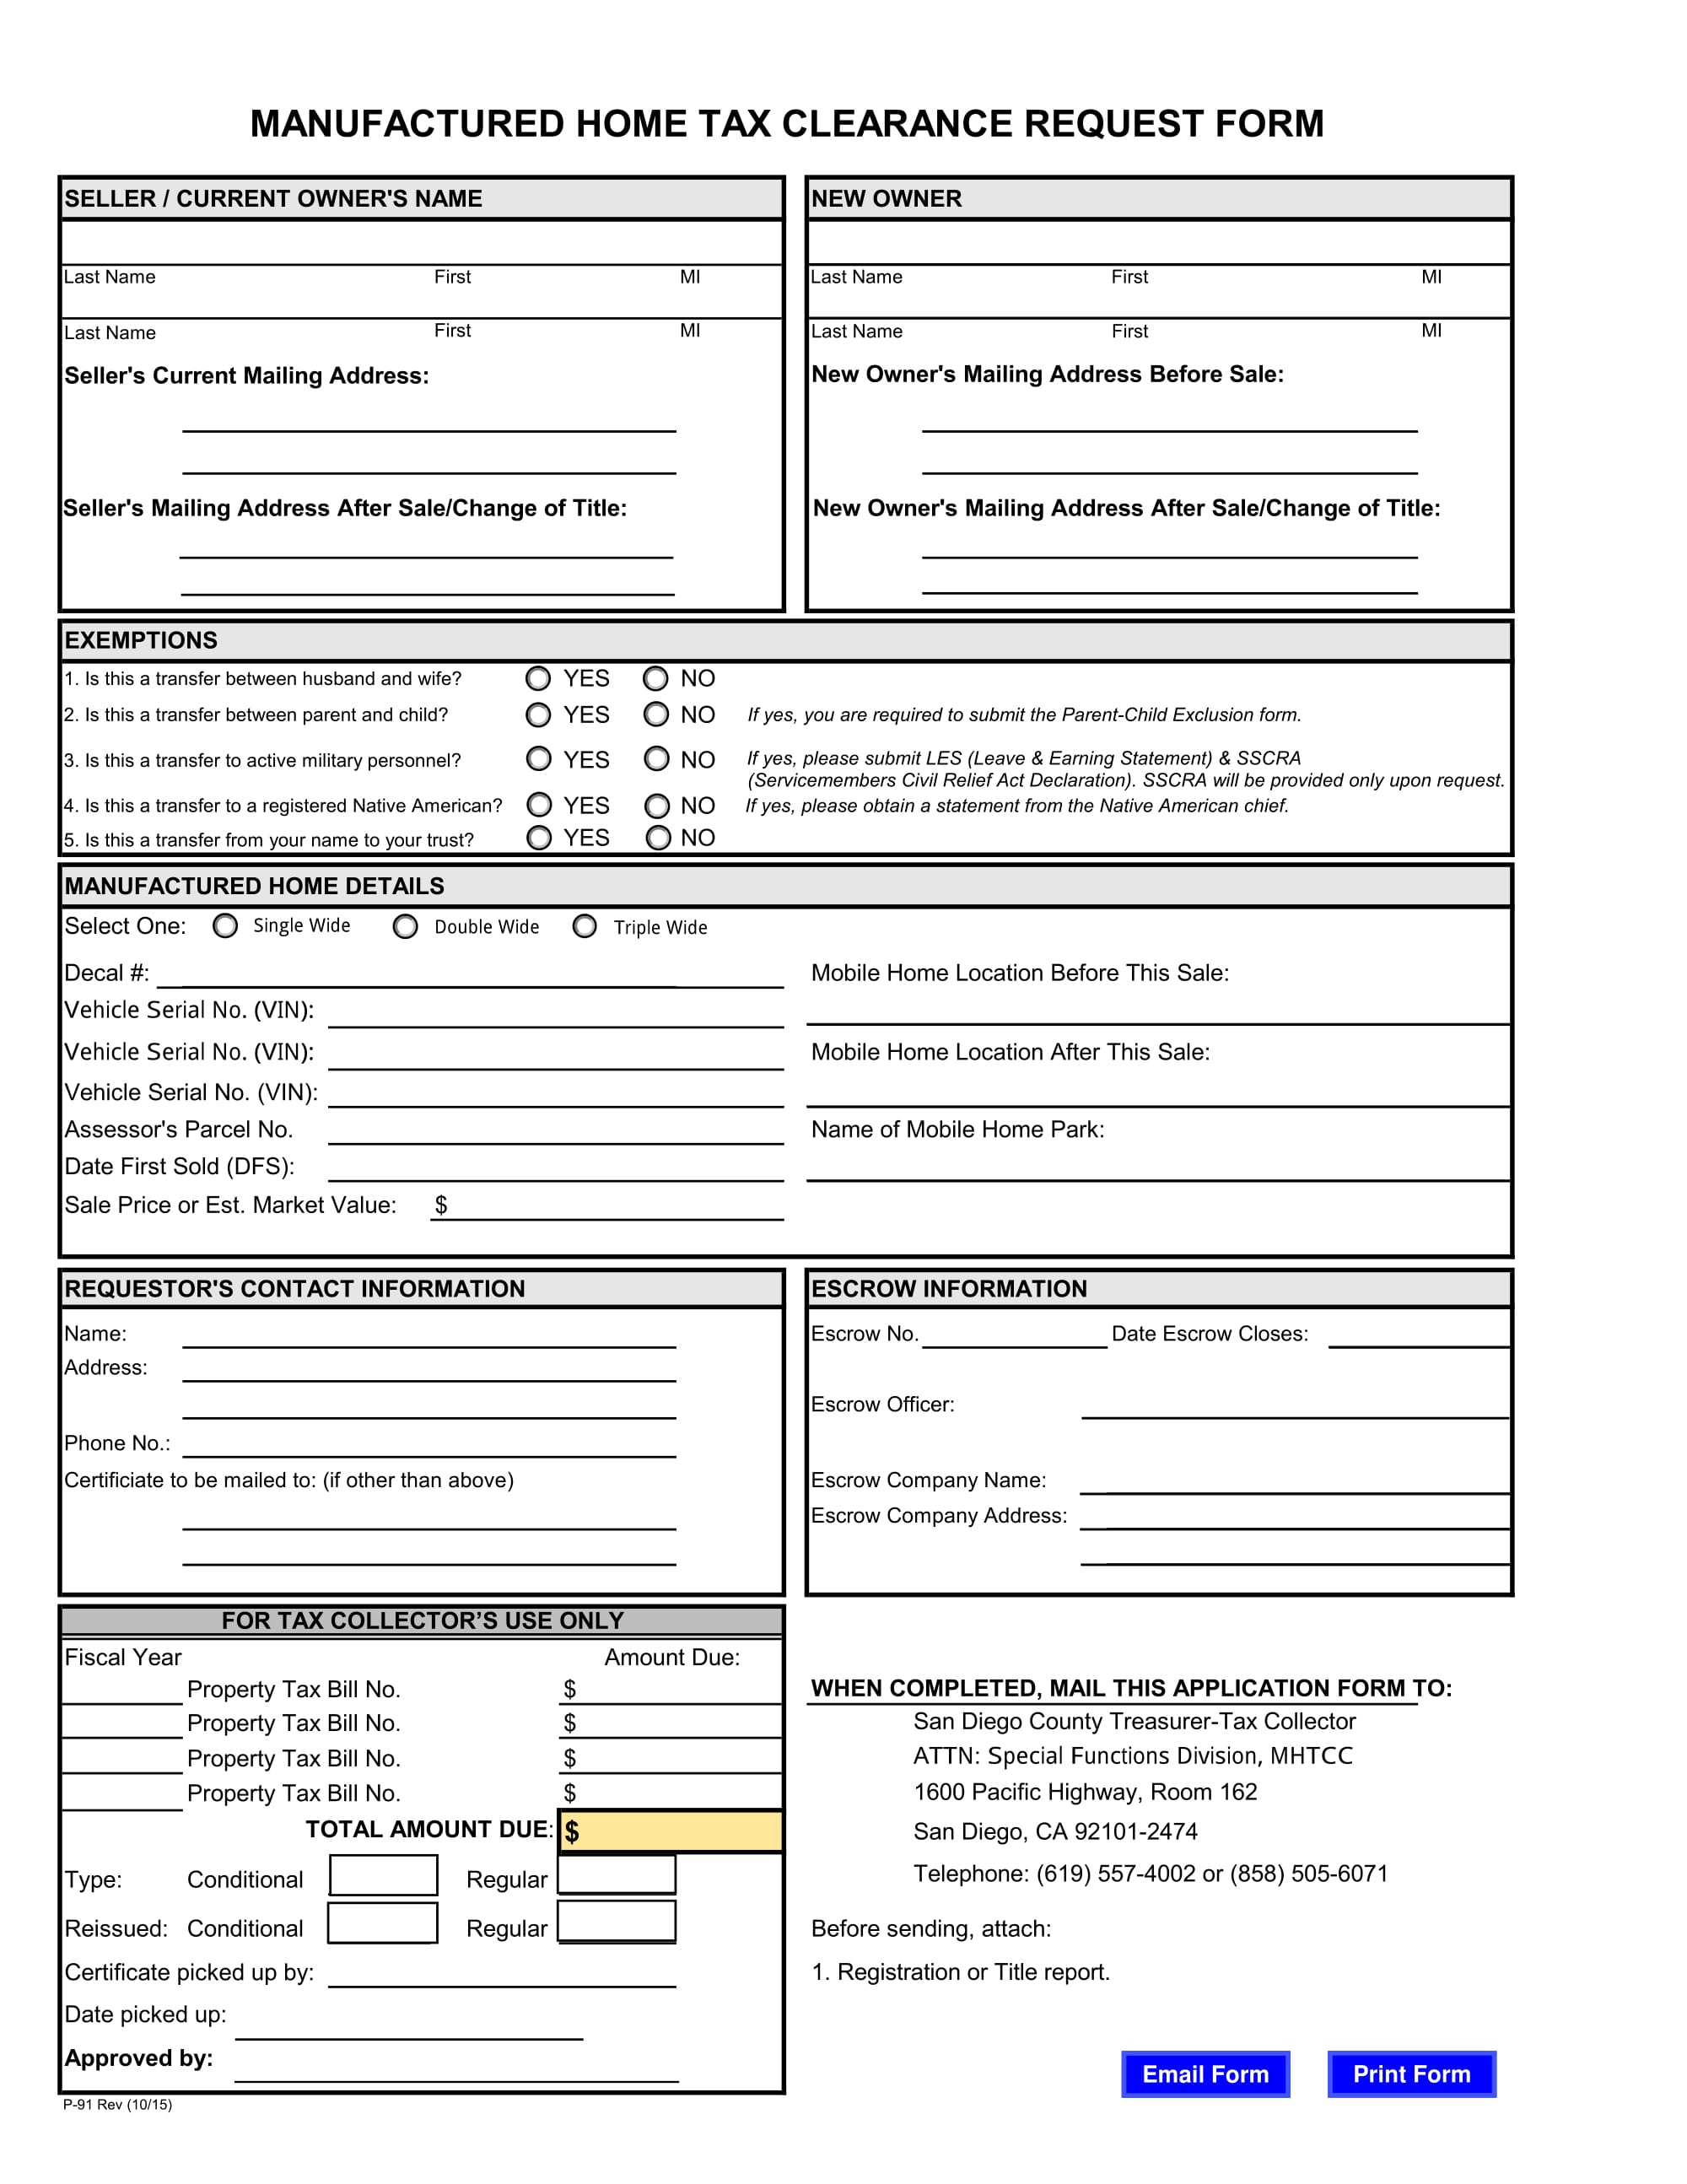 tax clearance request form 1